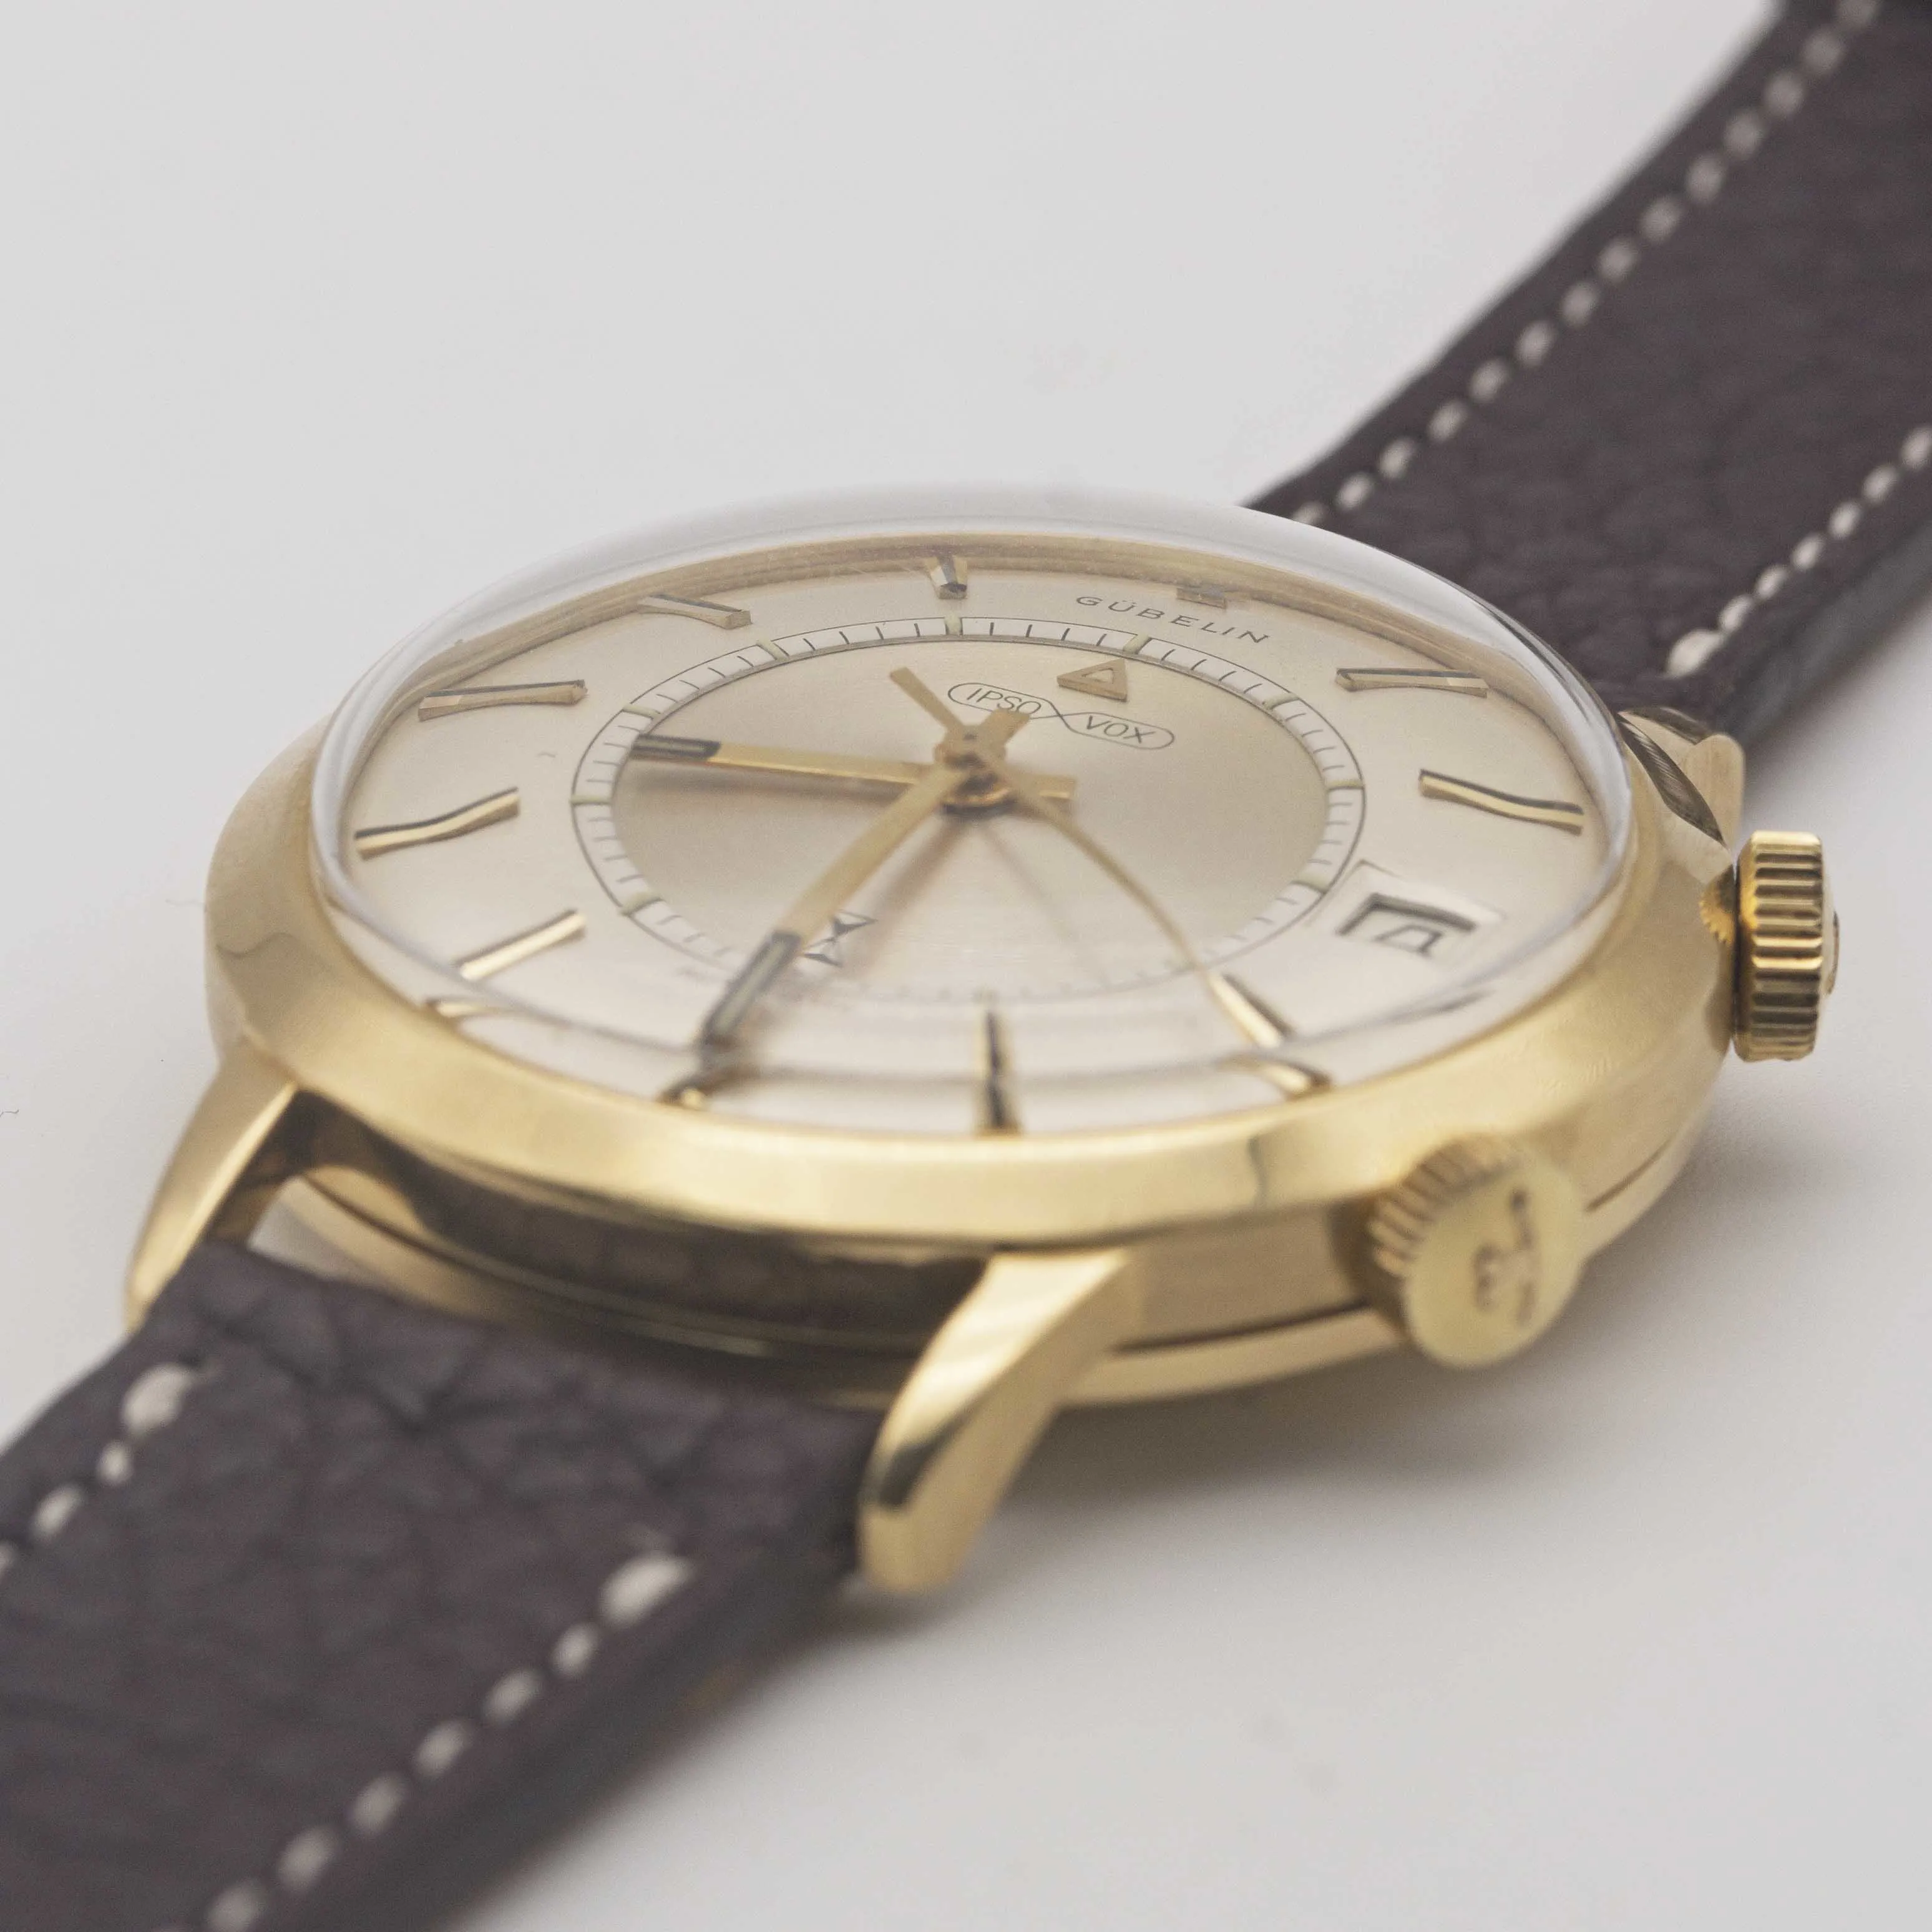 Jaeger-LeCoultre Memovox 855 37mm Yellow gold Champagne 3